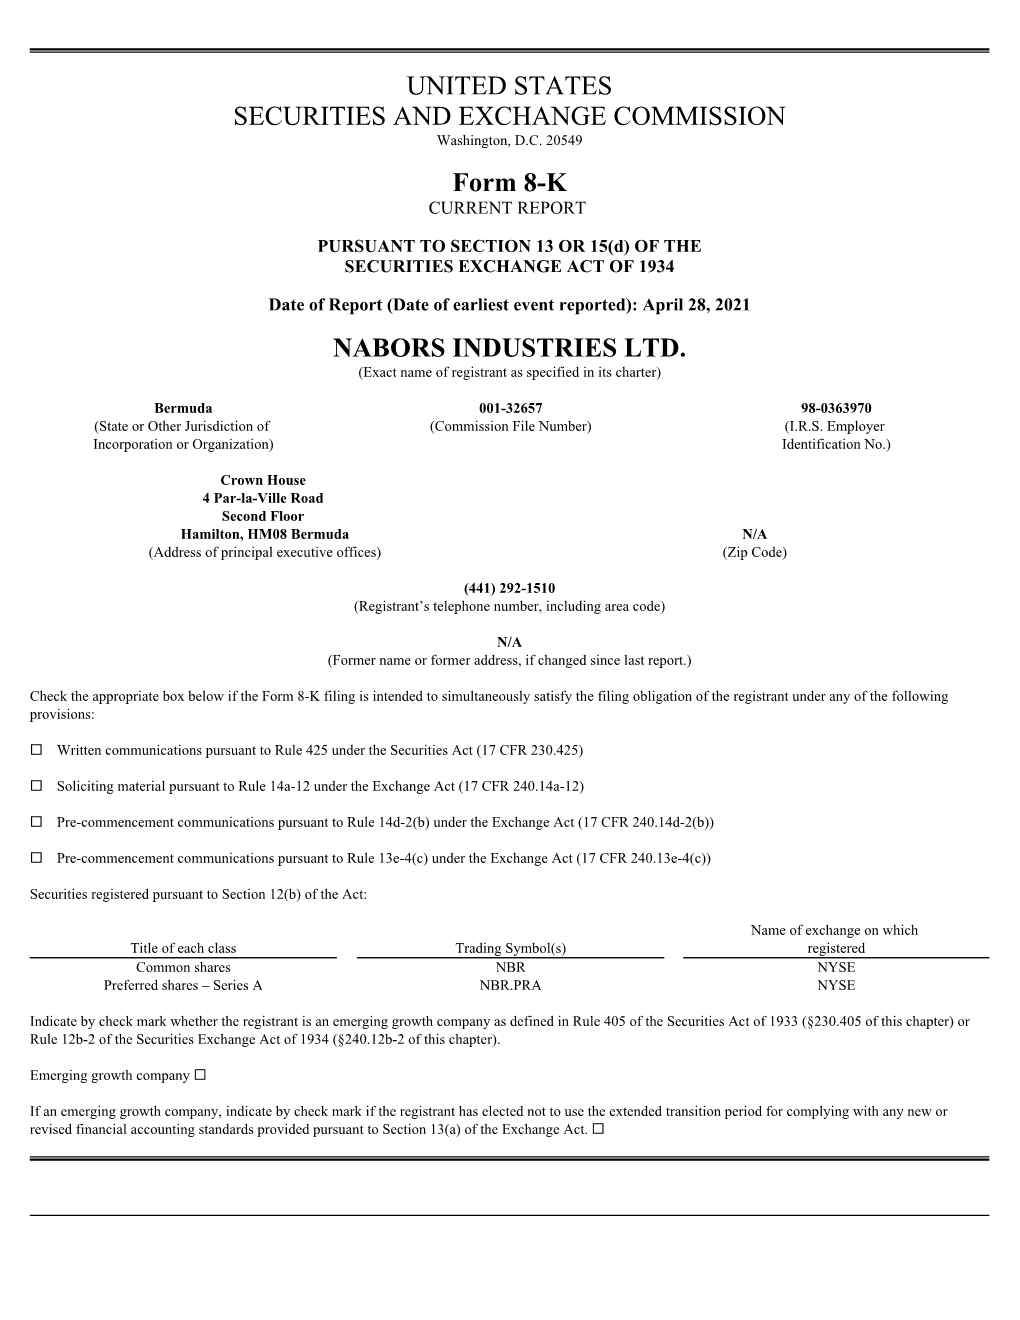 NABORS INDUSTRIES LTD. (Exact Name of Registrant As Specified in Its Charter)